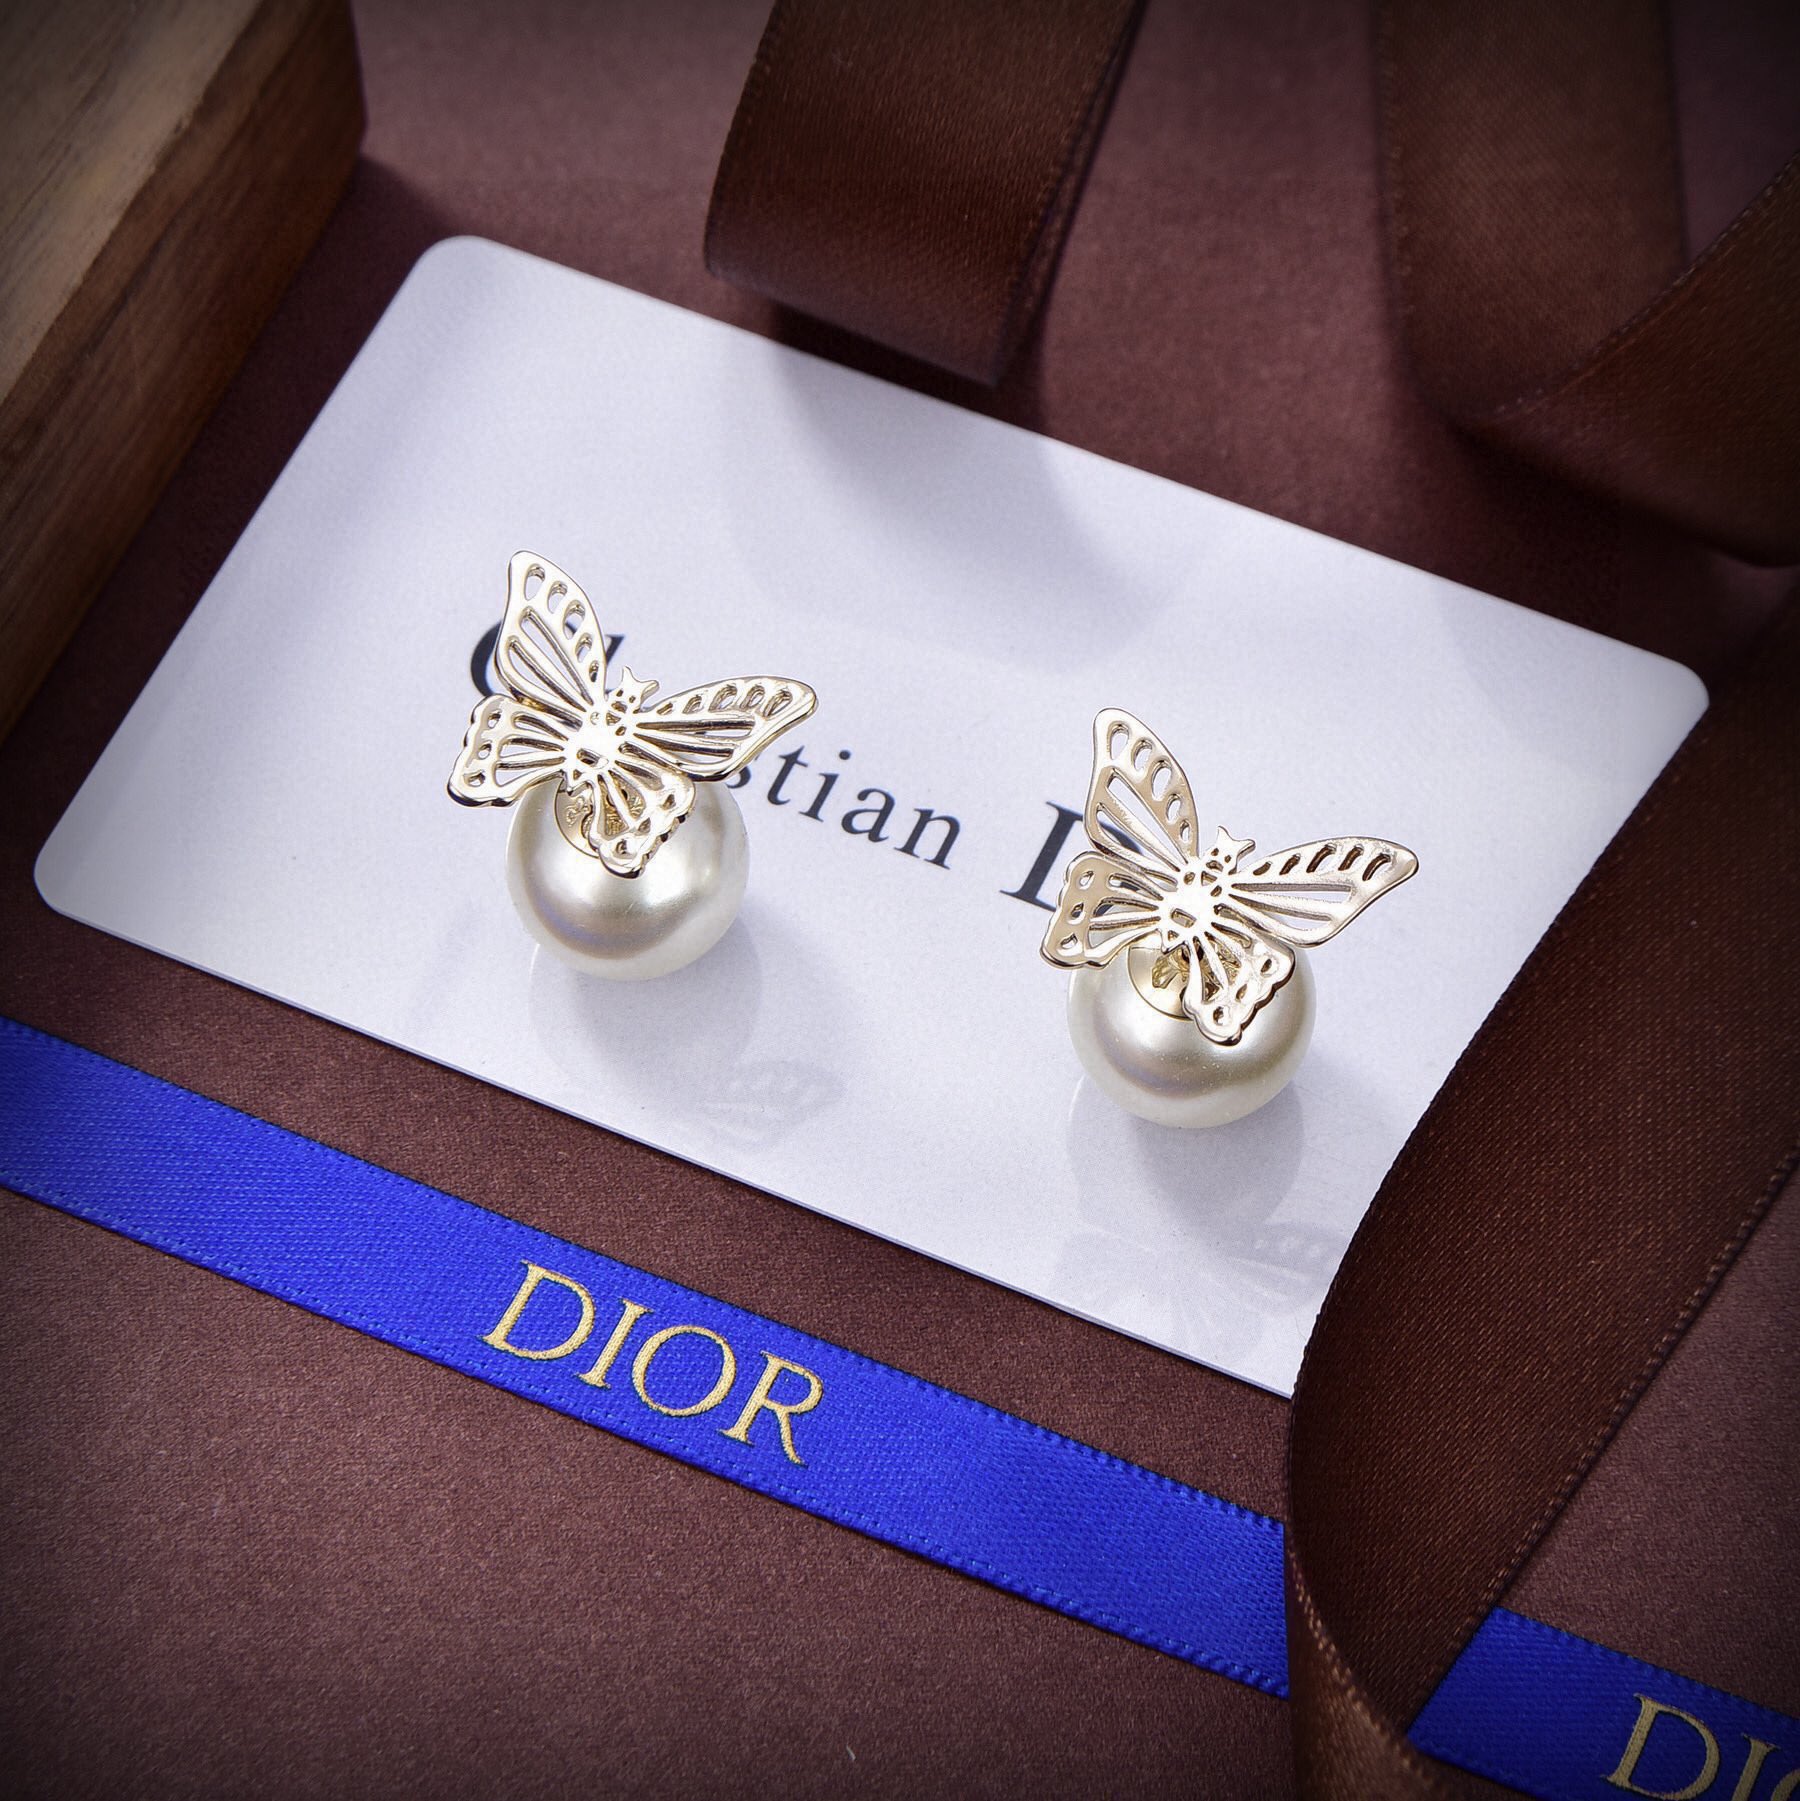 Dior Jewelry Earring Summer Collection Fashion